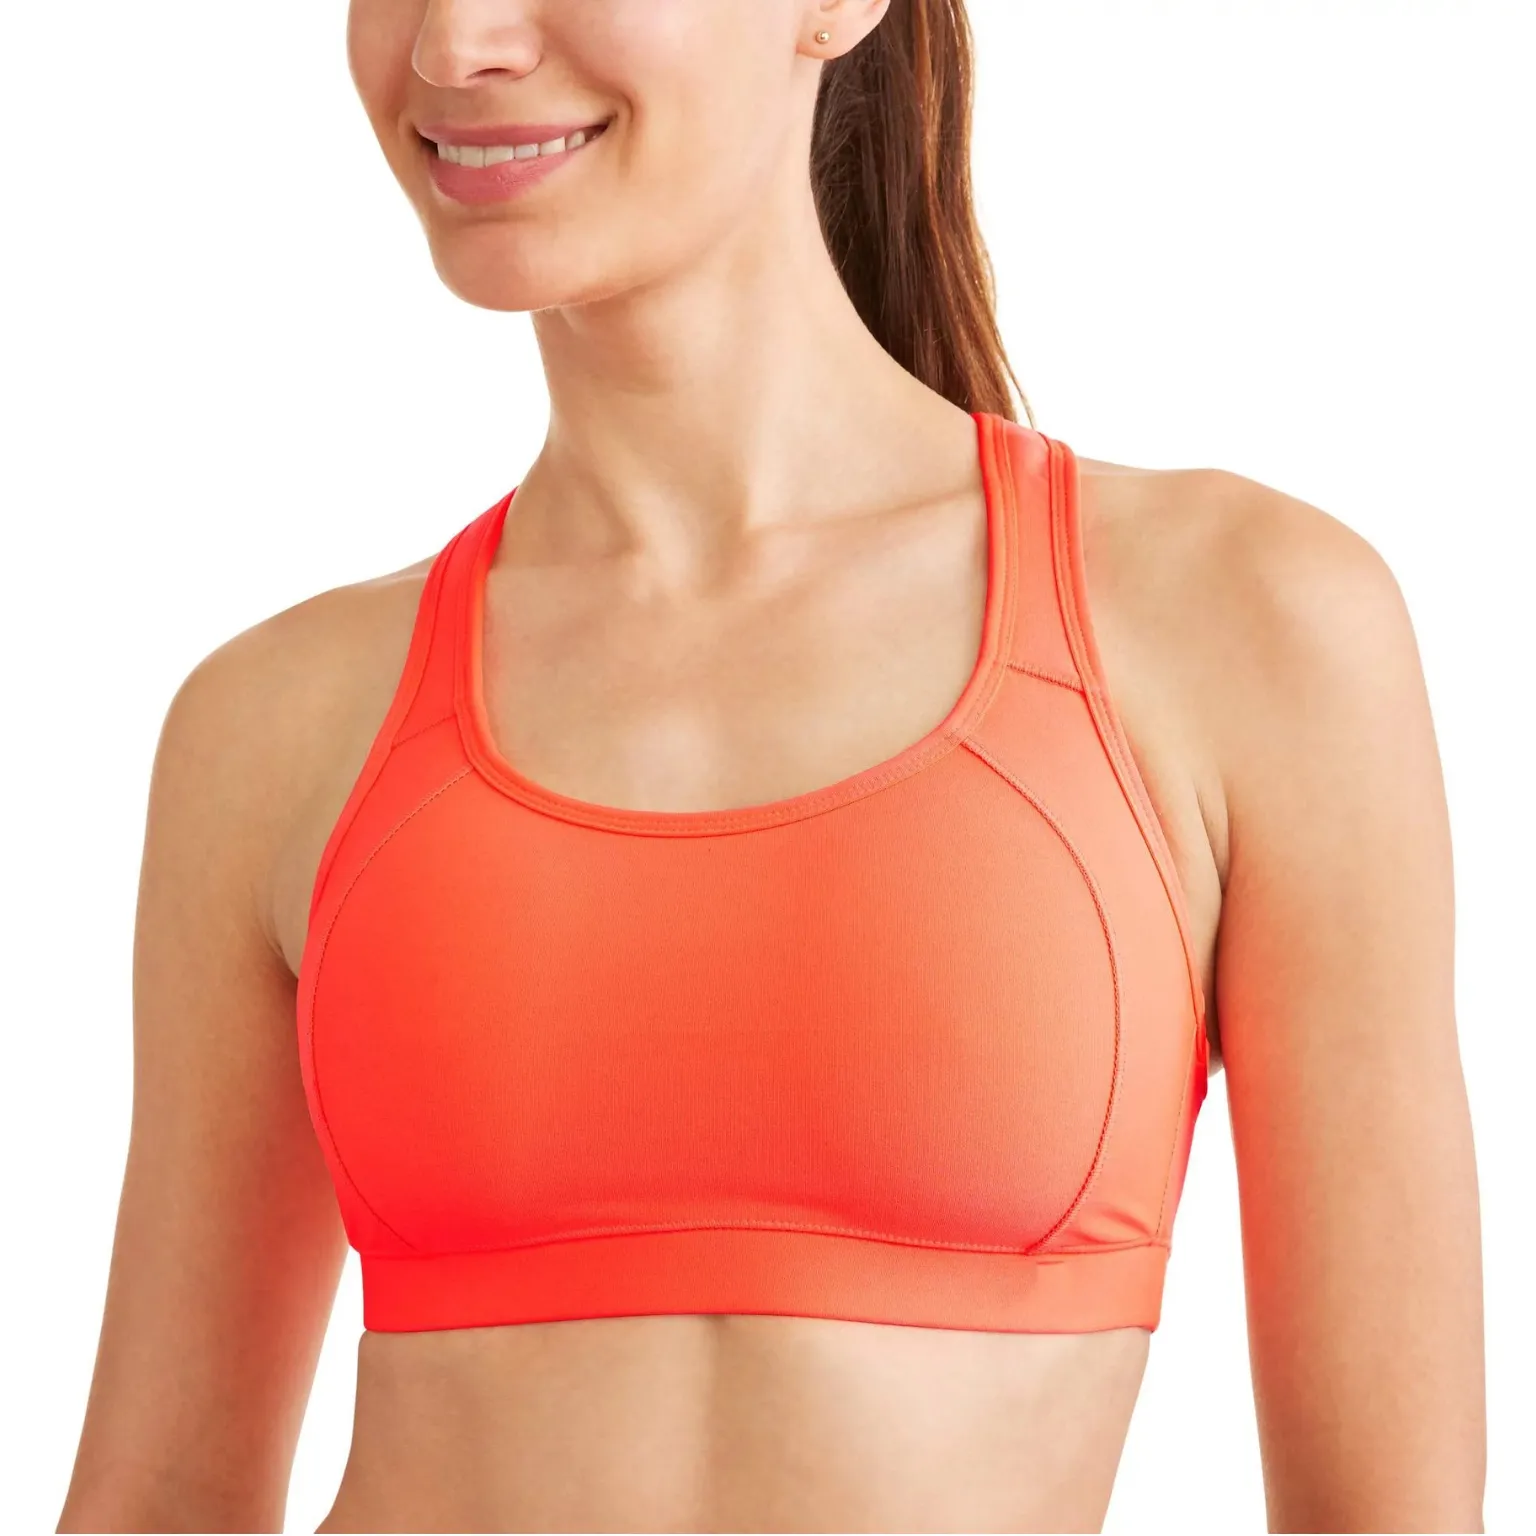 High Impact Sports Bra Manufacturing with superior quality